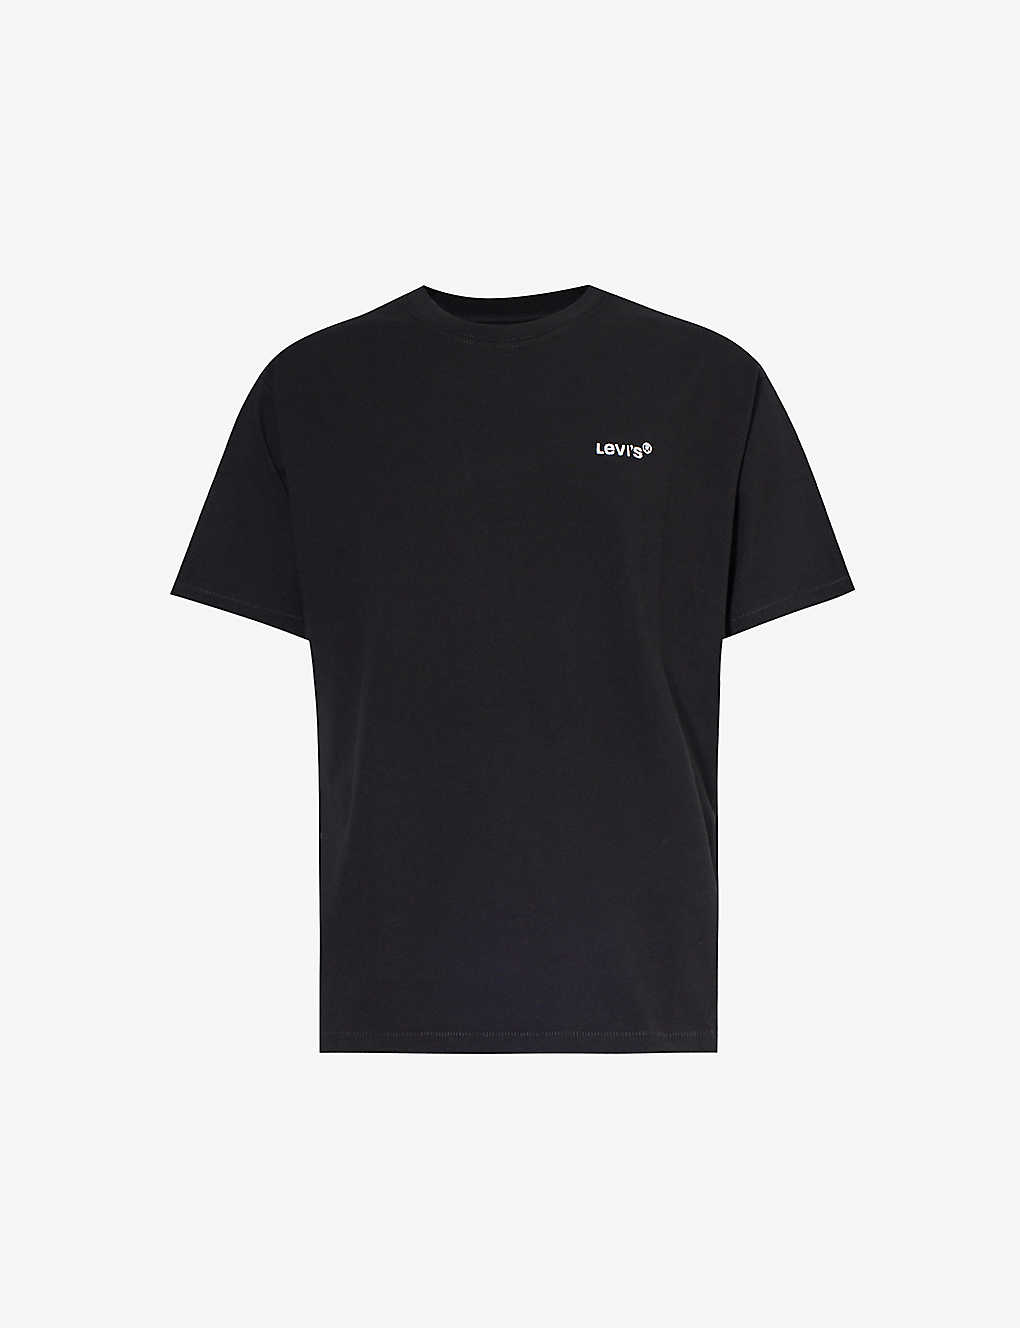 Levi's Brand-embroidered Crewneck Cotton-jersey T-shirt In Black